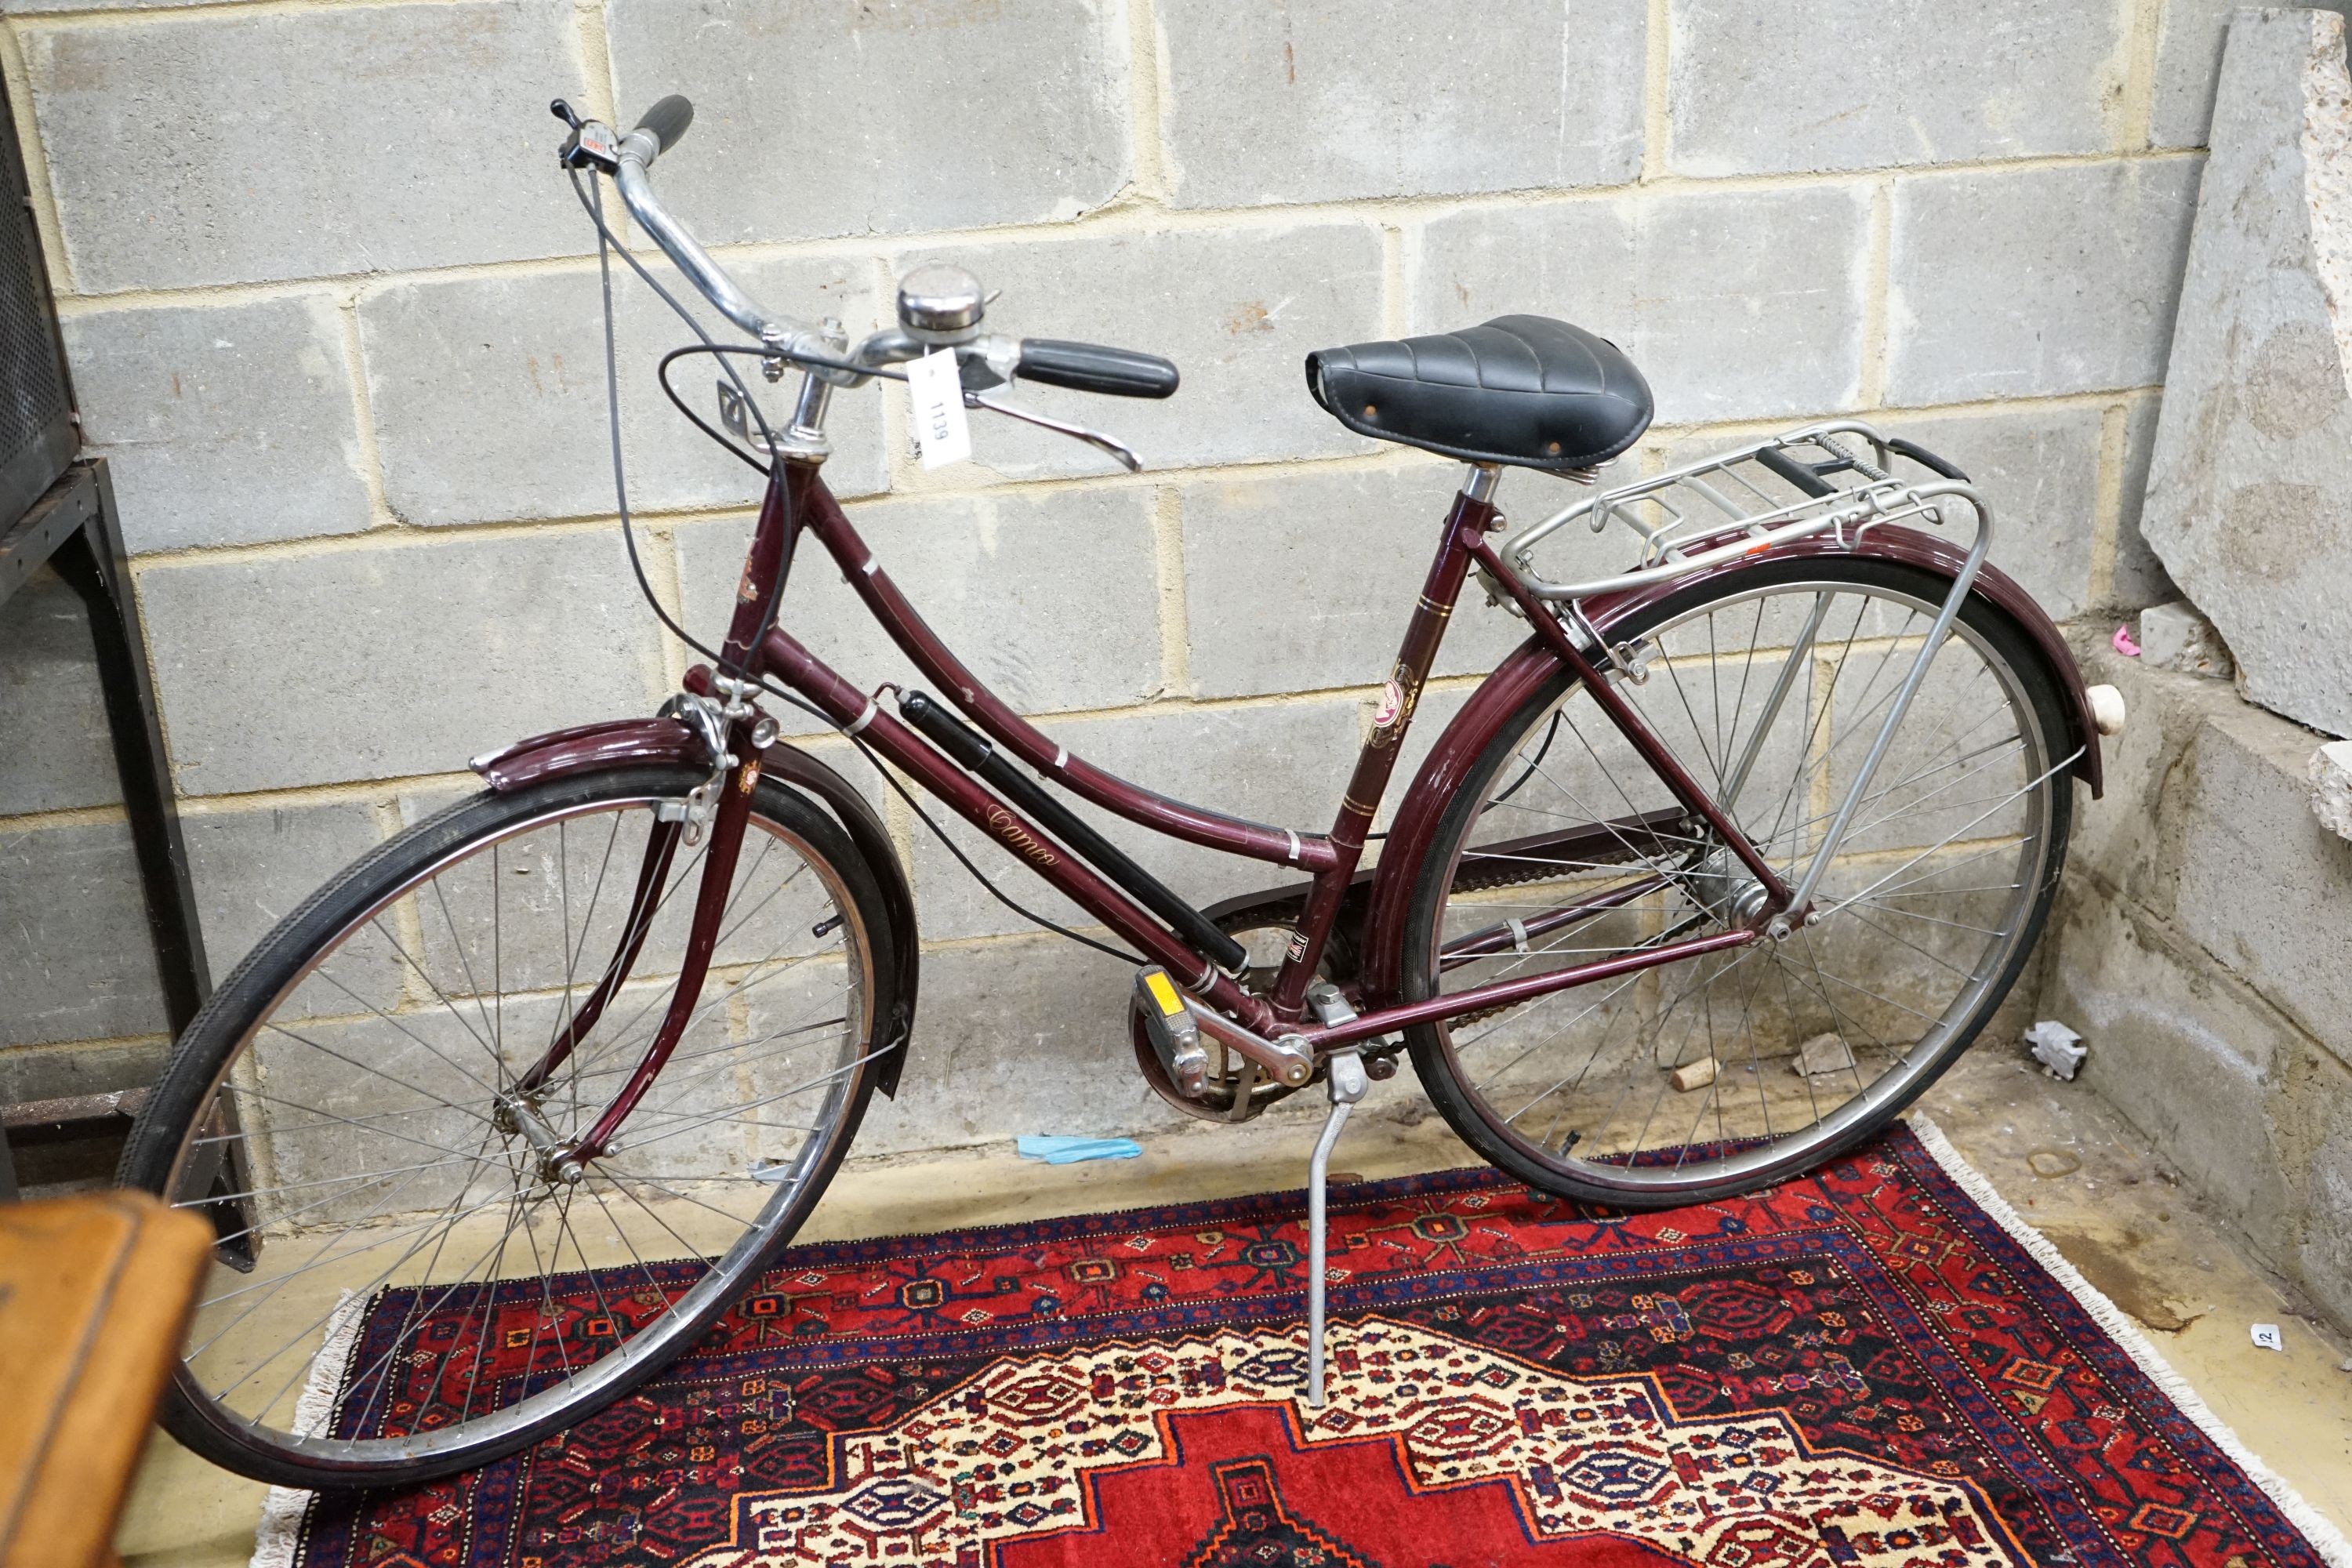 A Raleigh Cameo lady's bicycle